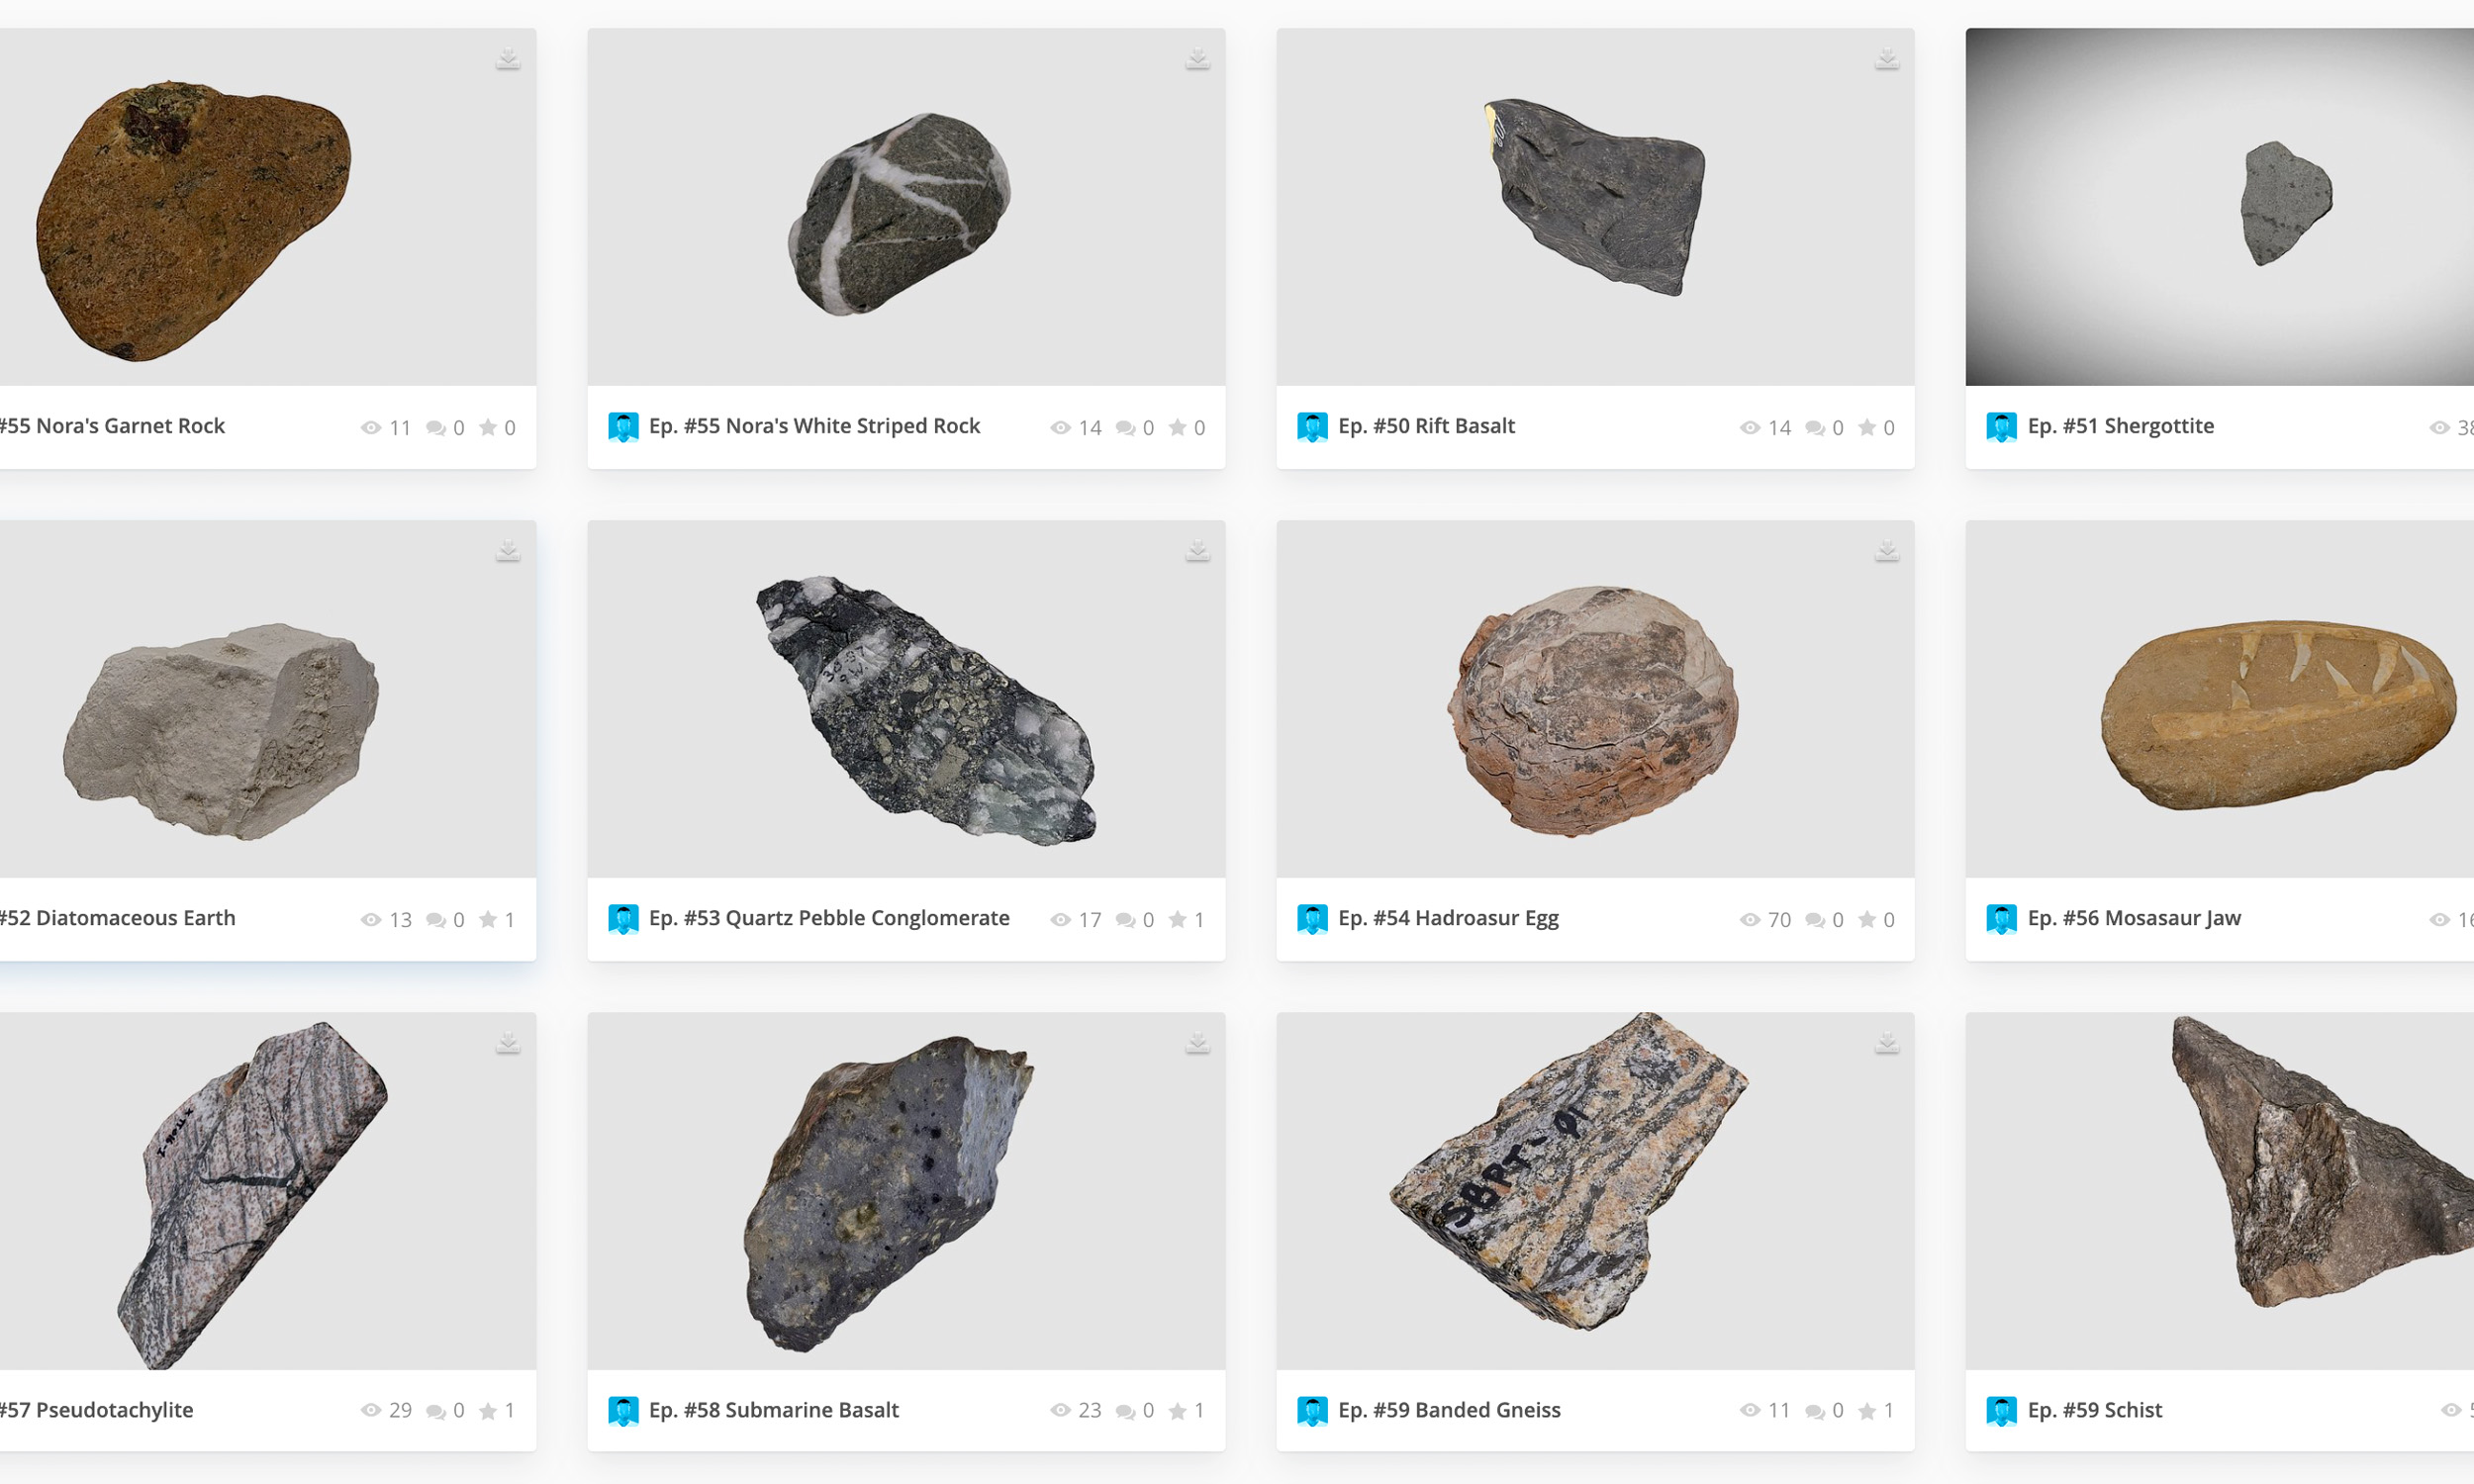 3D Models in the Classroom: Every Rock has a Story